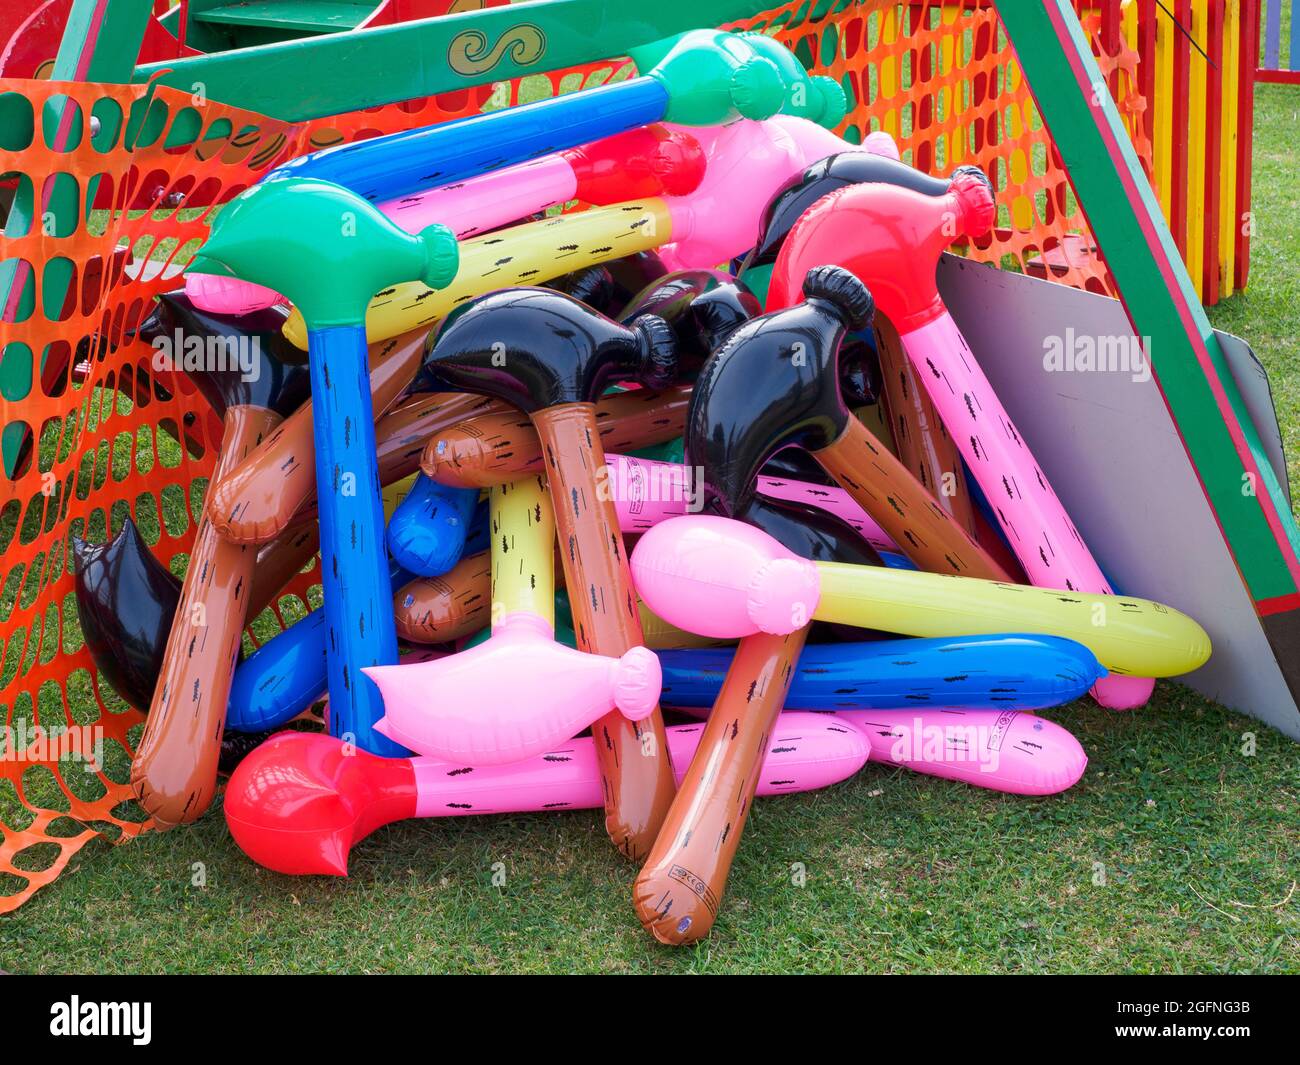 Pile of inflatable plastic hammers, prizes at a fairground stall, Bude, Cornwall, UK Stock Photo